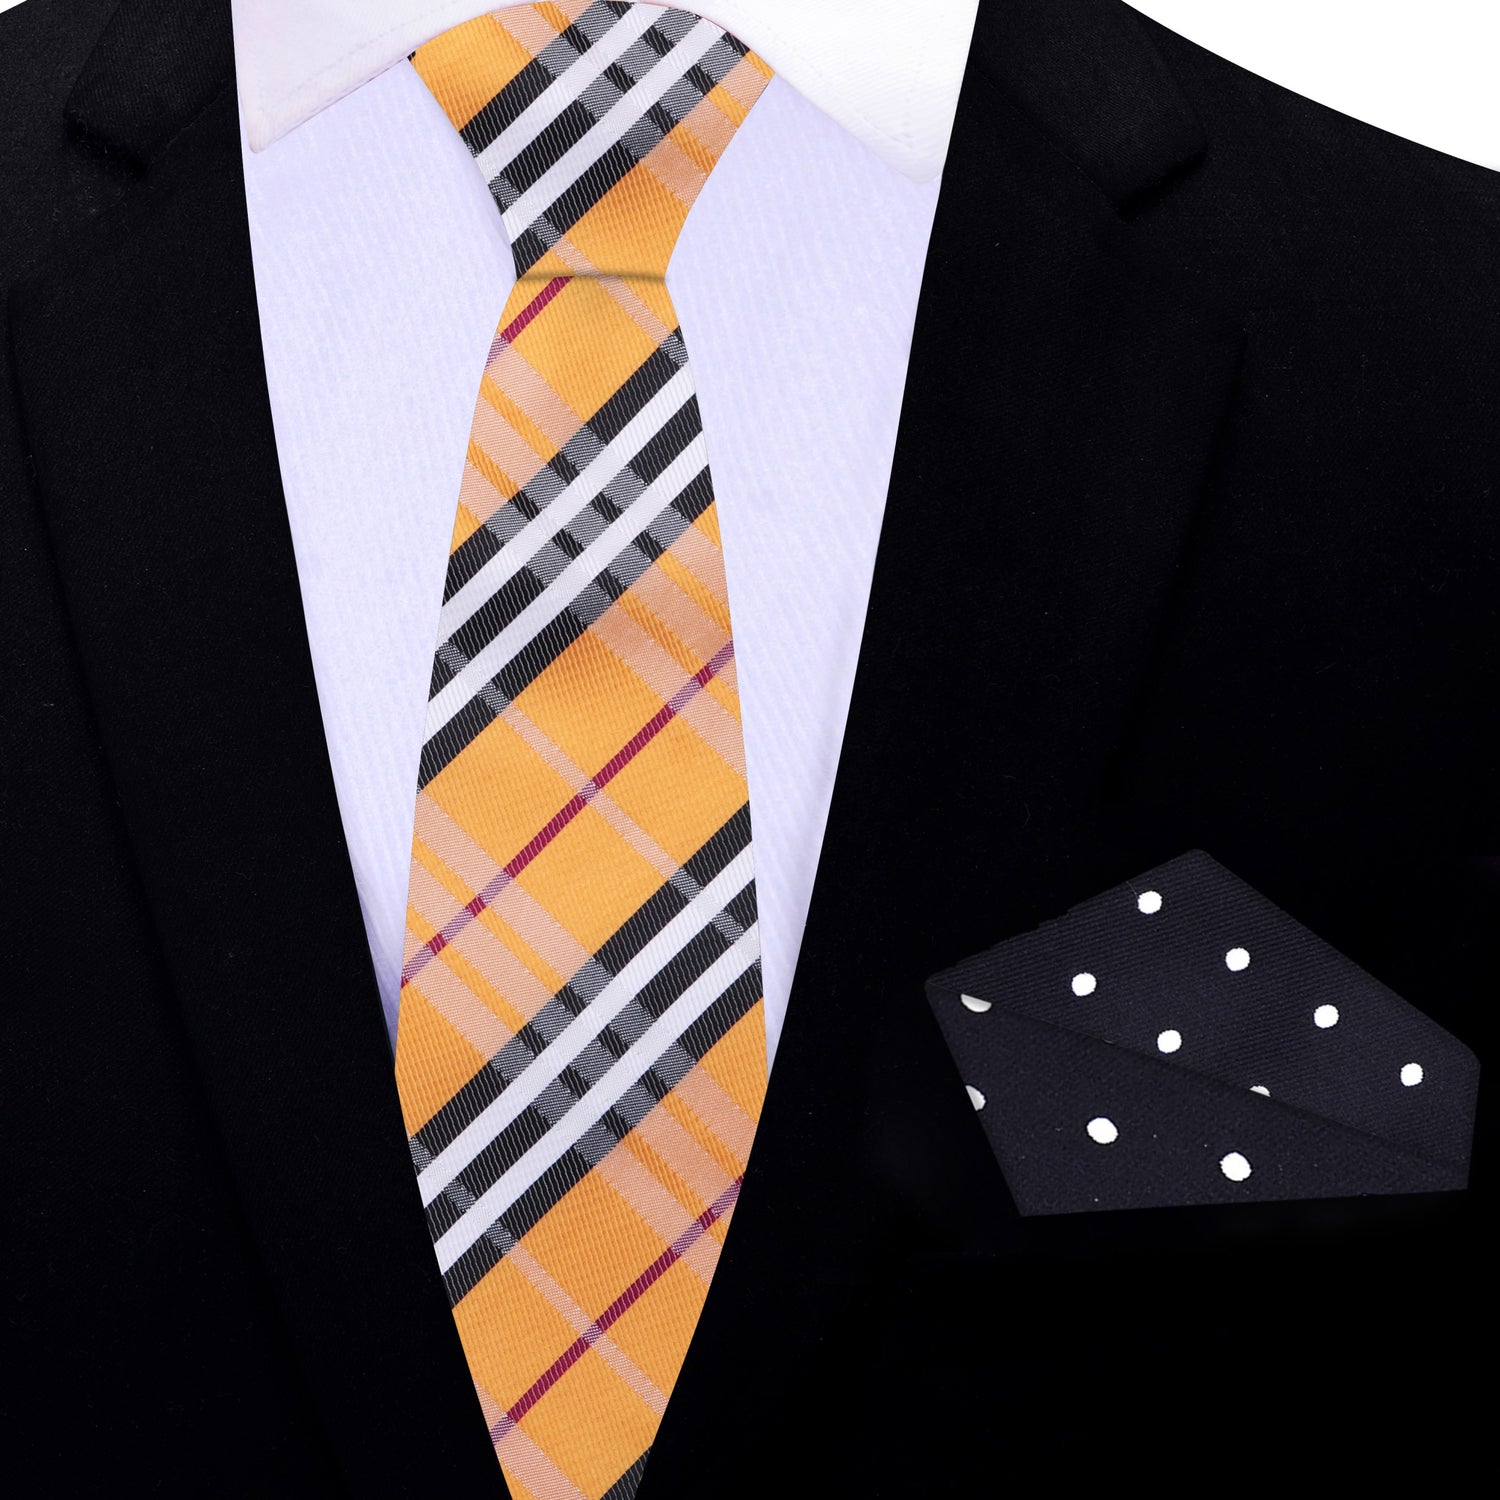 Thin Tie: Golden Brown, Black, White, Red Plaid Tie and Black with White Dots Square